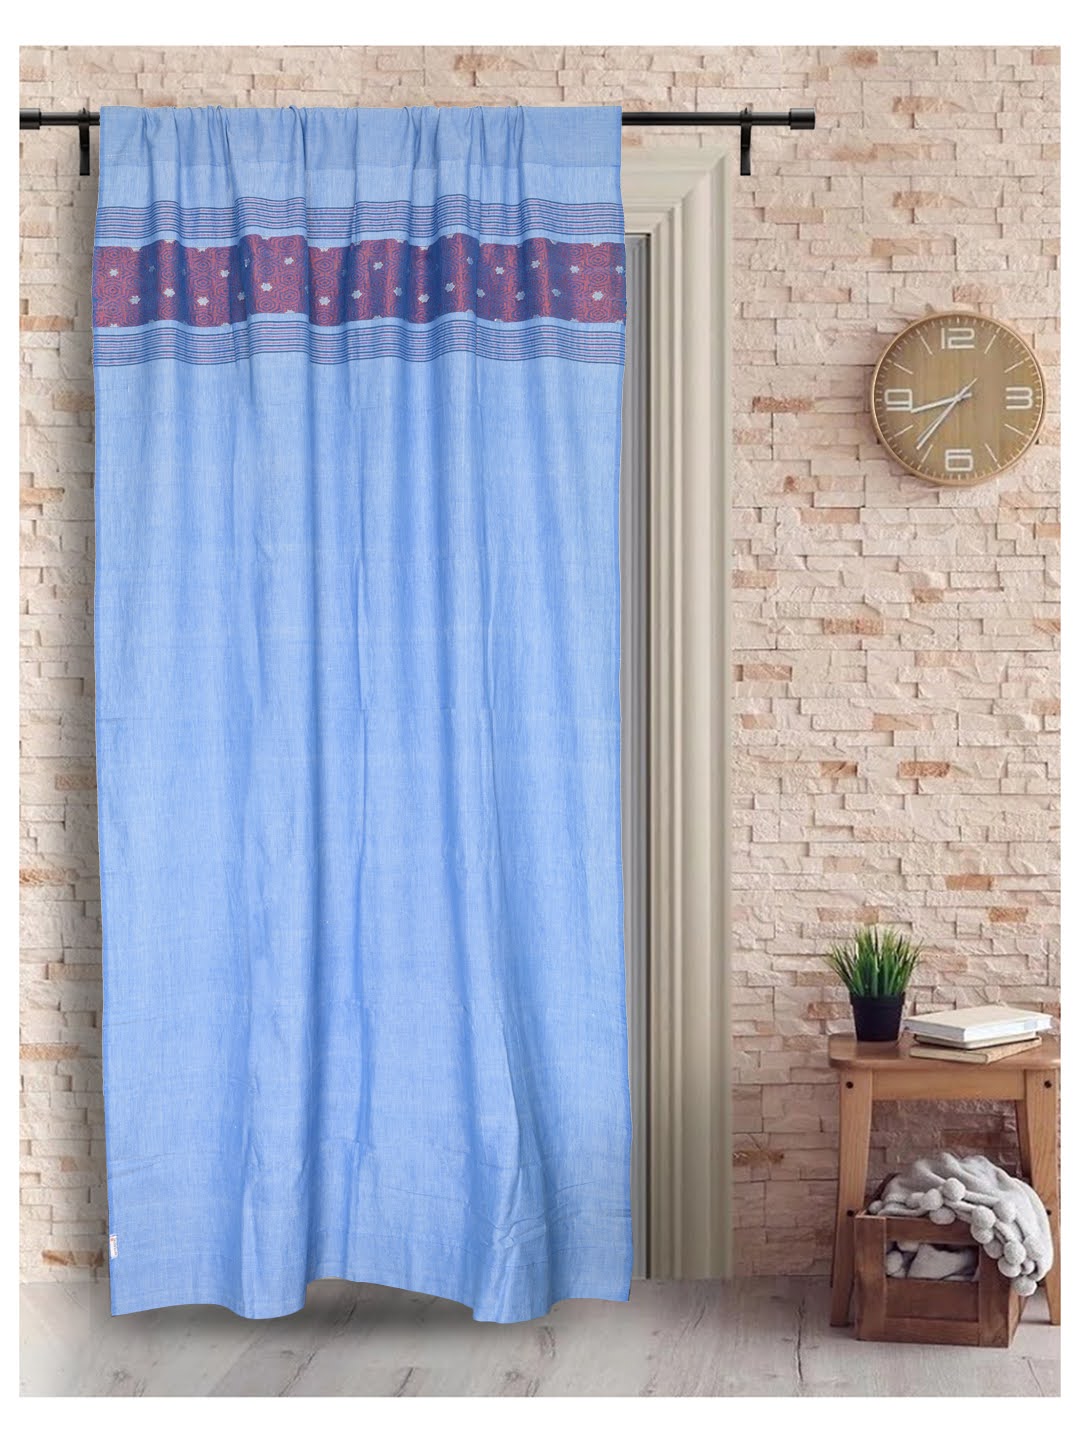 Handwoven Cotton  Blue Pink  Rod Pocket Door Curtain for home